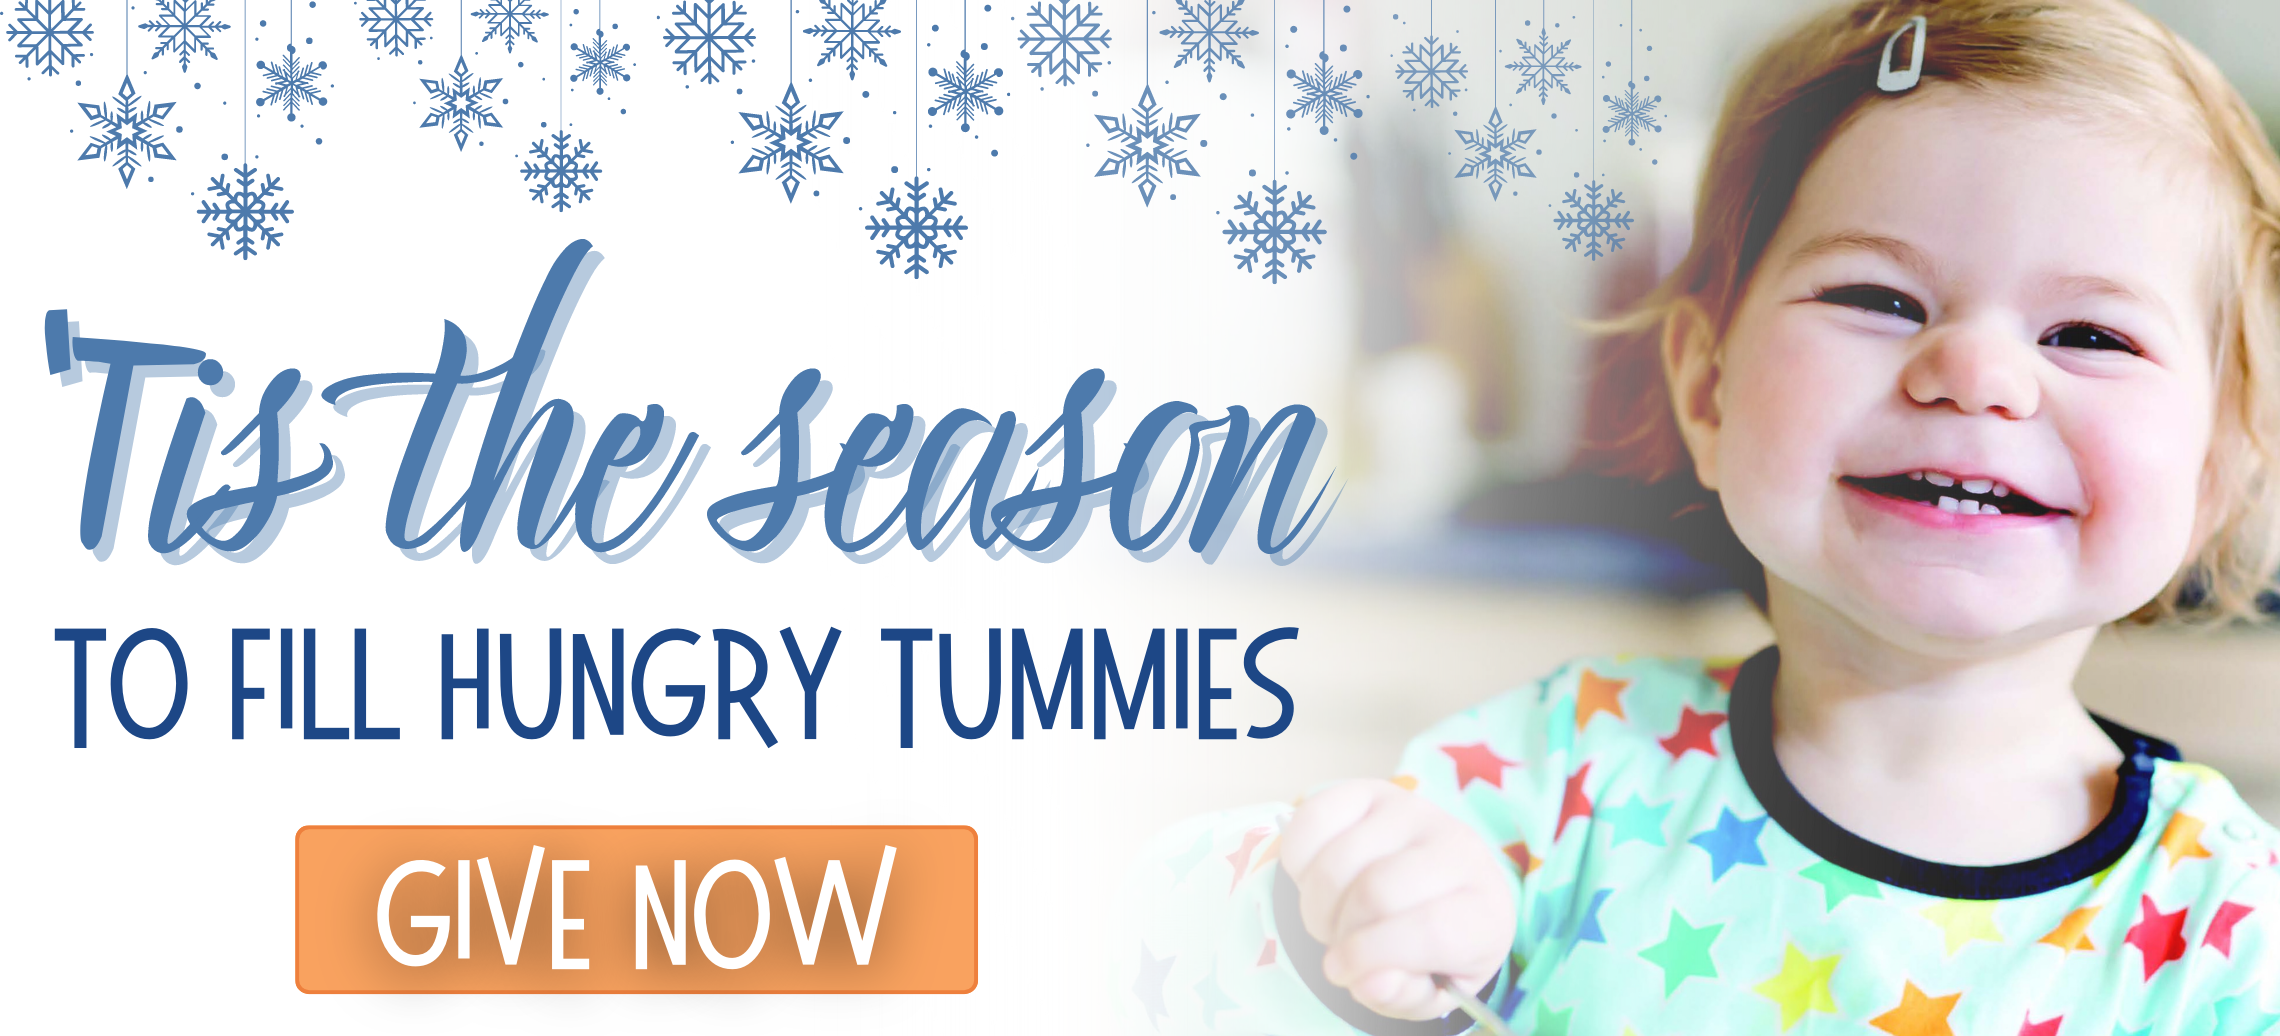 Tis the season to fill hungry tummies. Give today.